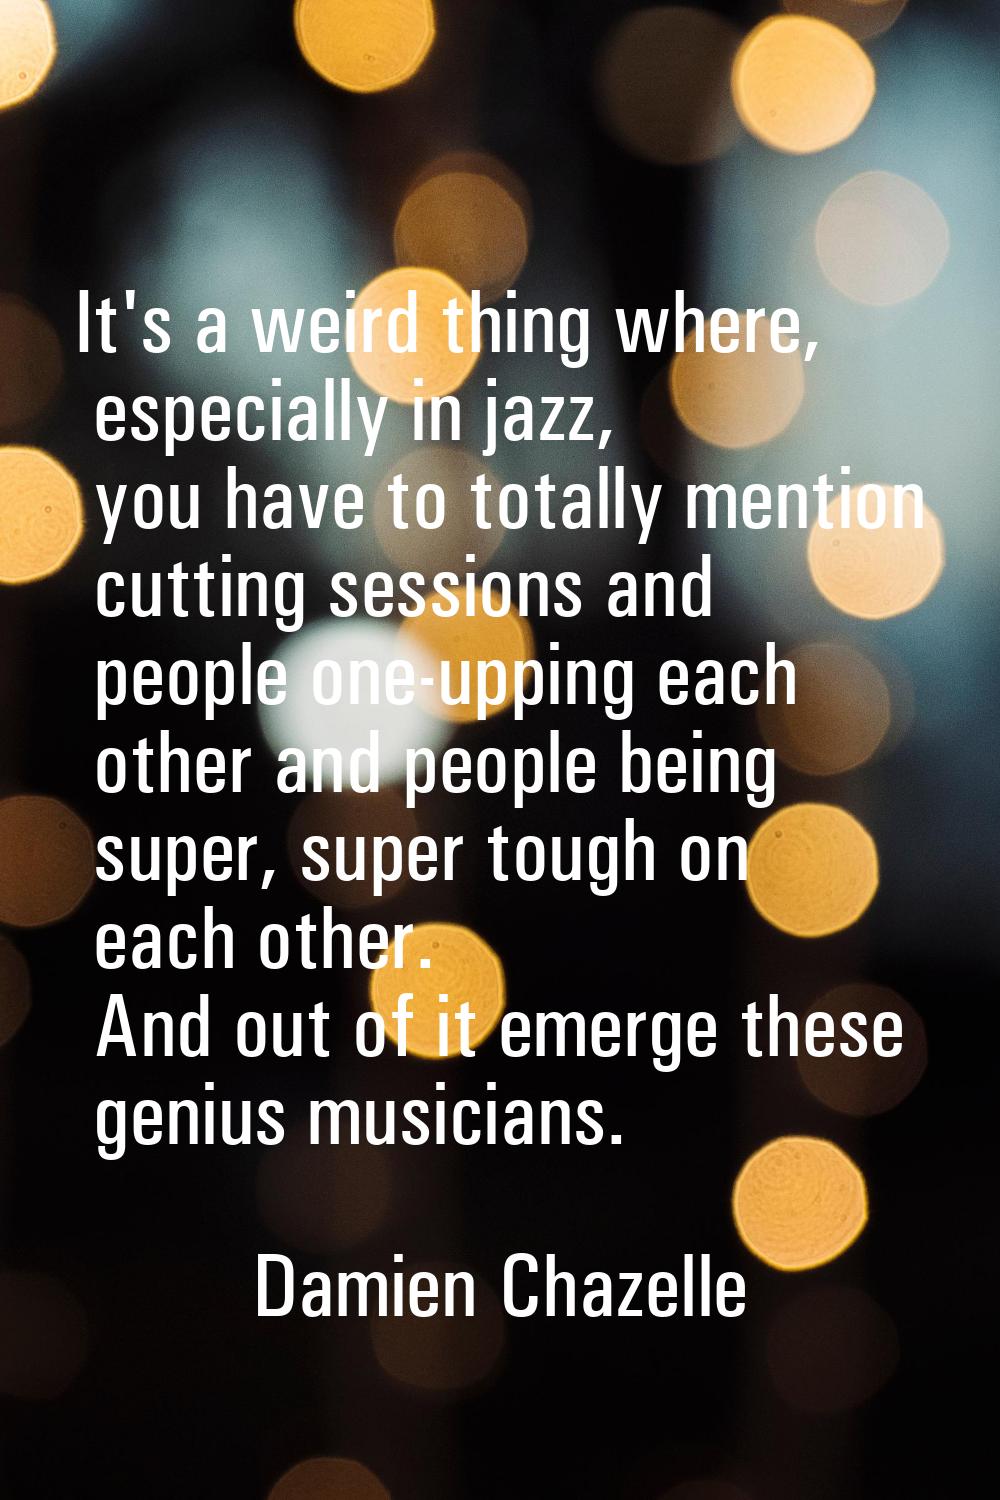 It's a weird thing where, especially in jazz, you have to totally mention cutting sessions and peop